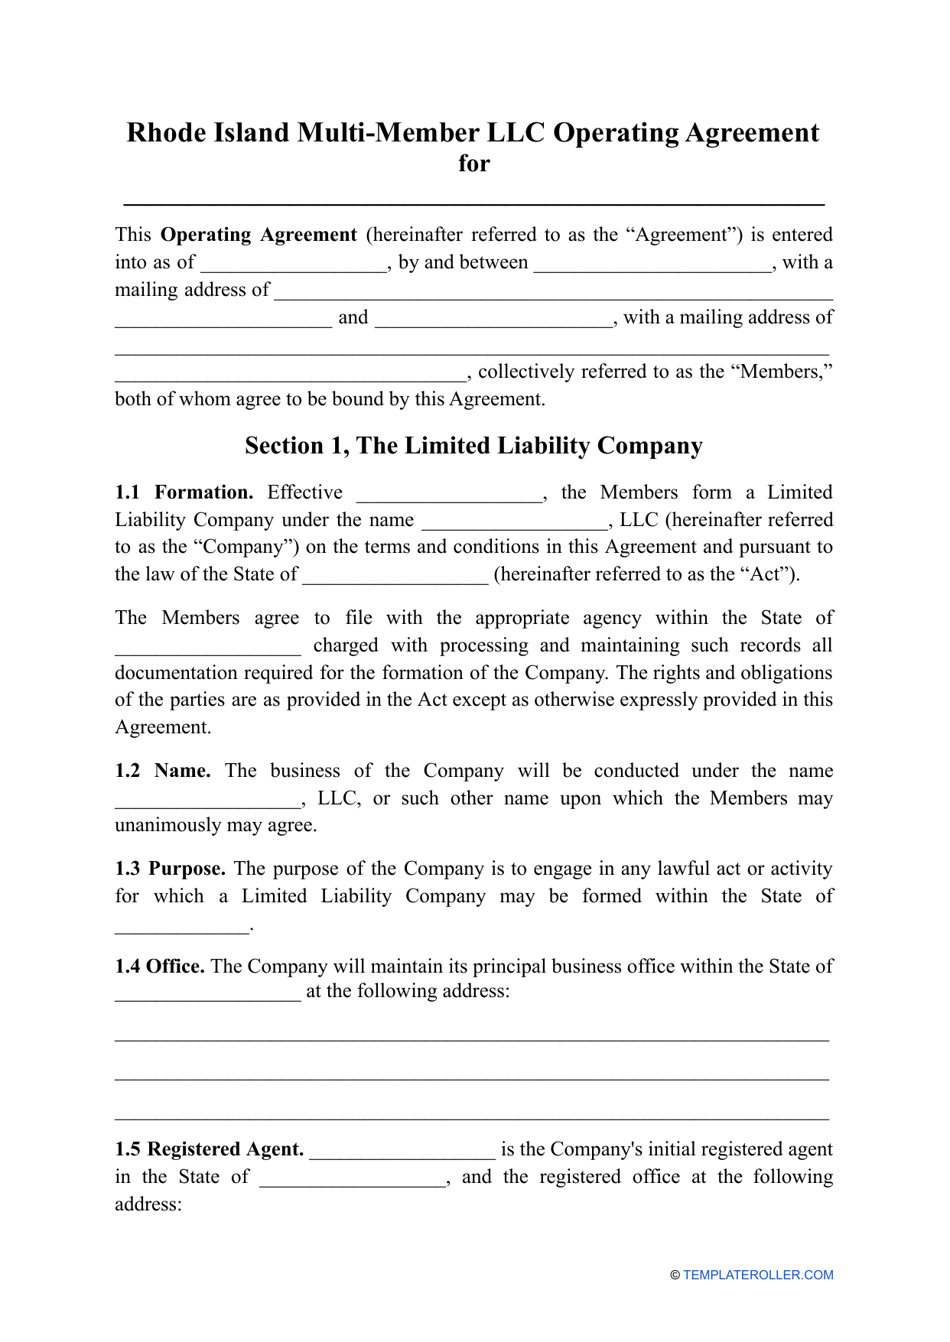 Multi-Member LLC Operating Agreement Template - Rhode Island, Page 1